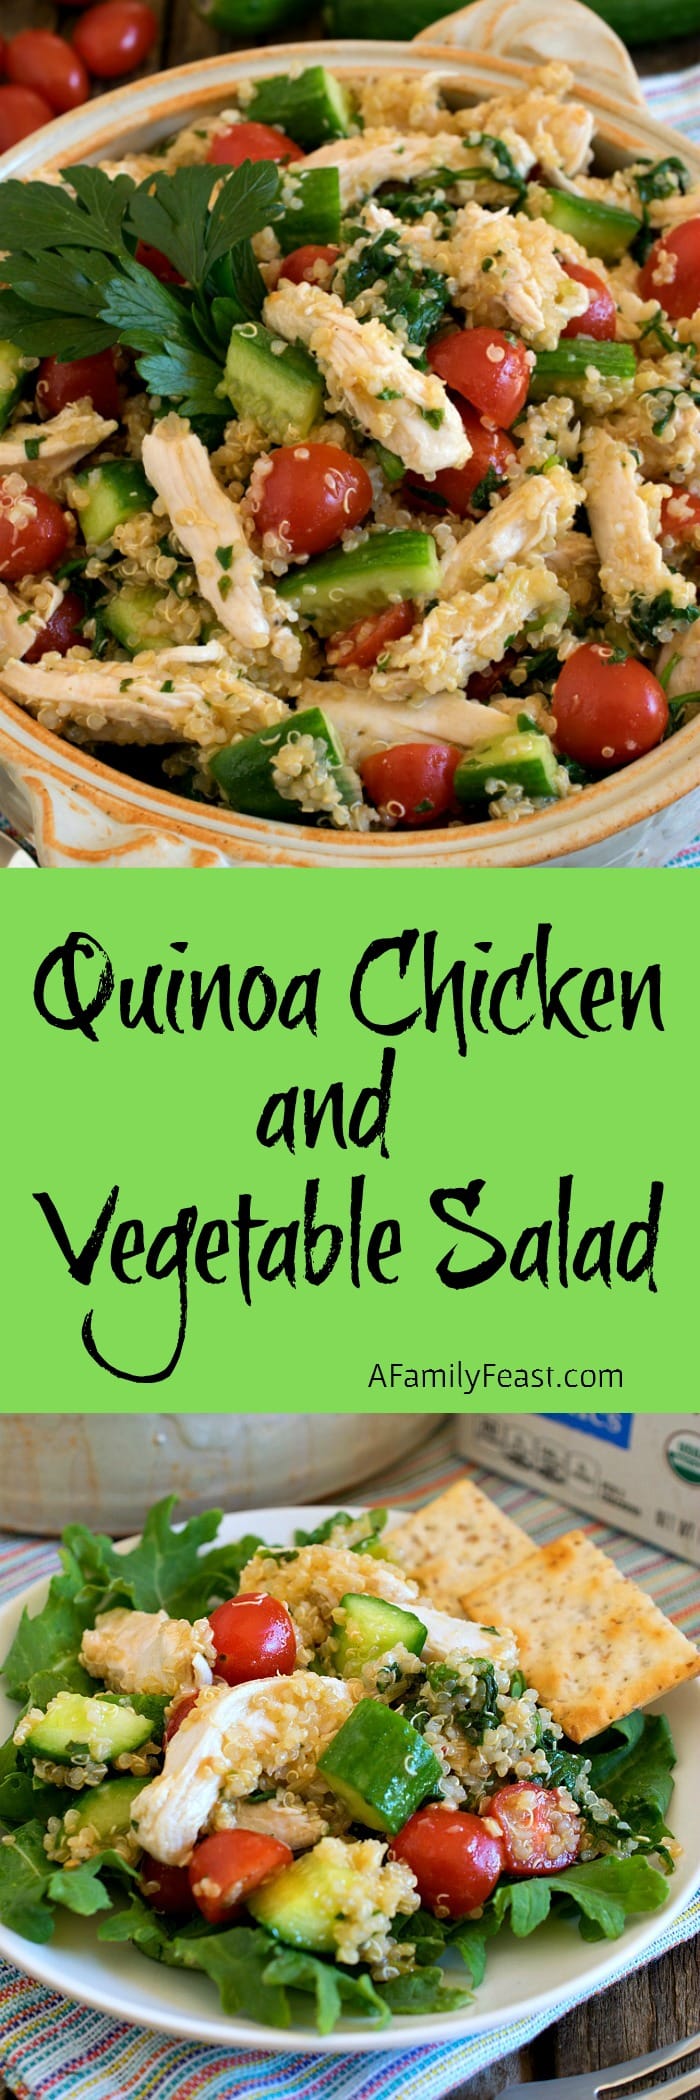 Quinoa Chicken Vegetable Salad - A Family Feaast